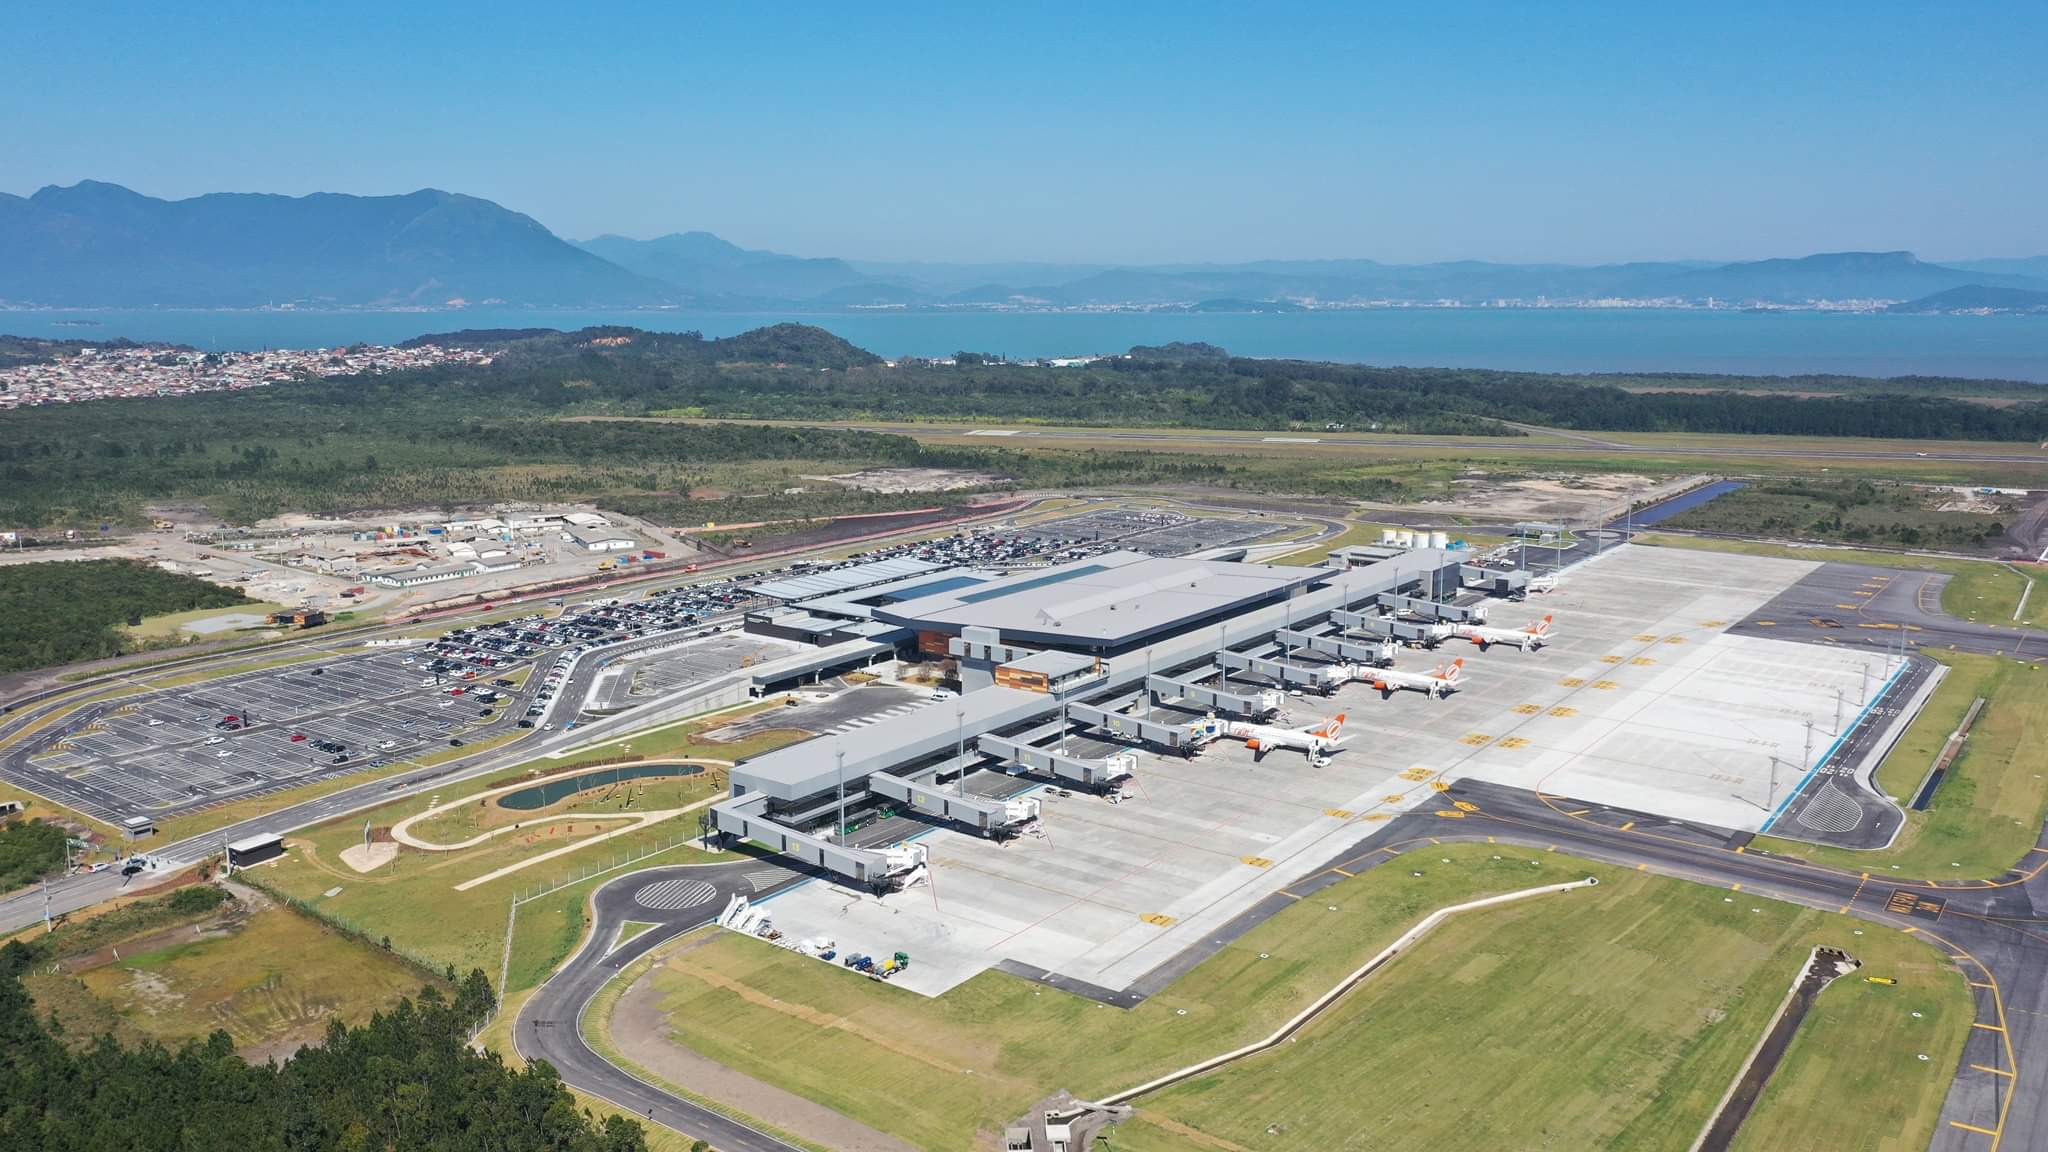 The Minister of Infrastructure, Tarcísio de Freitas, reiterated that Brazil will succeed in auctioning off 43 airport concessions early next year, despite the sector's shutdown caused by the Covid-19 crisis in the country and said on Monday that the decision-making bodies, including the Federal Court of Auditors of Brazil (TCU), are united for the progress of the privatization program.